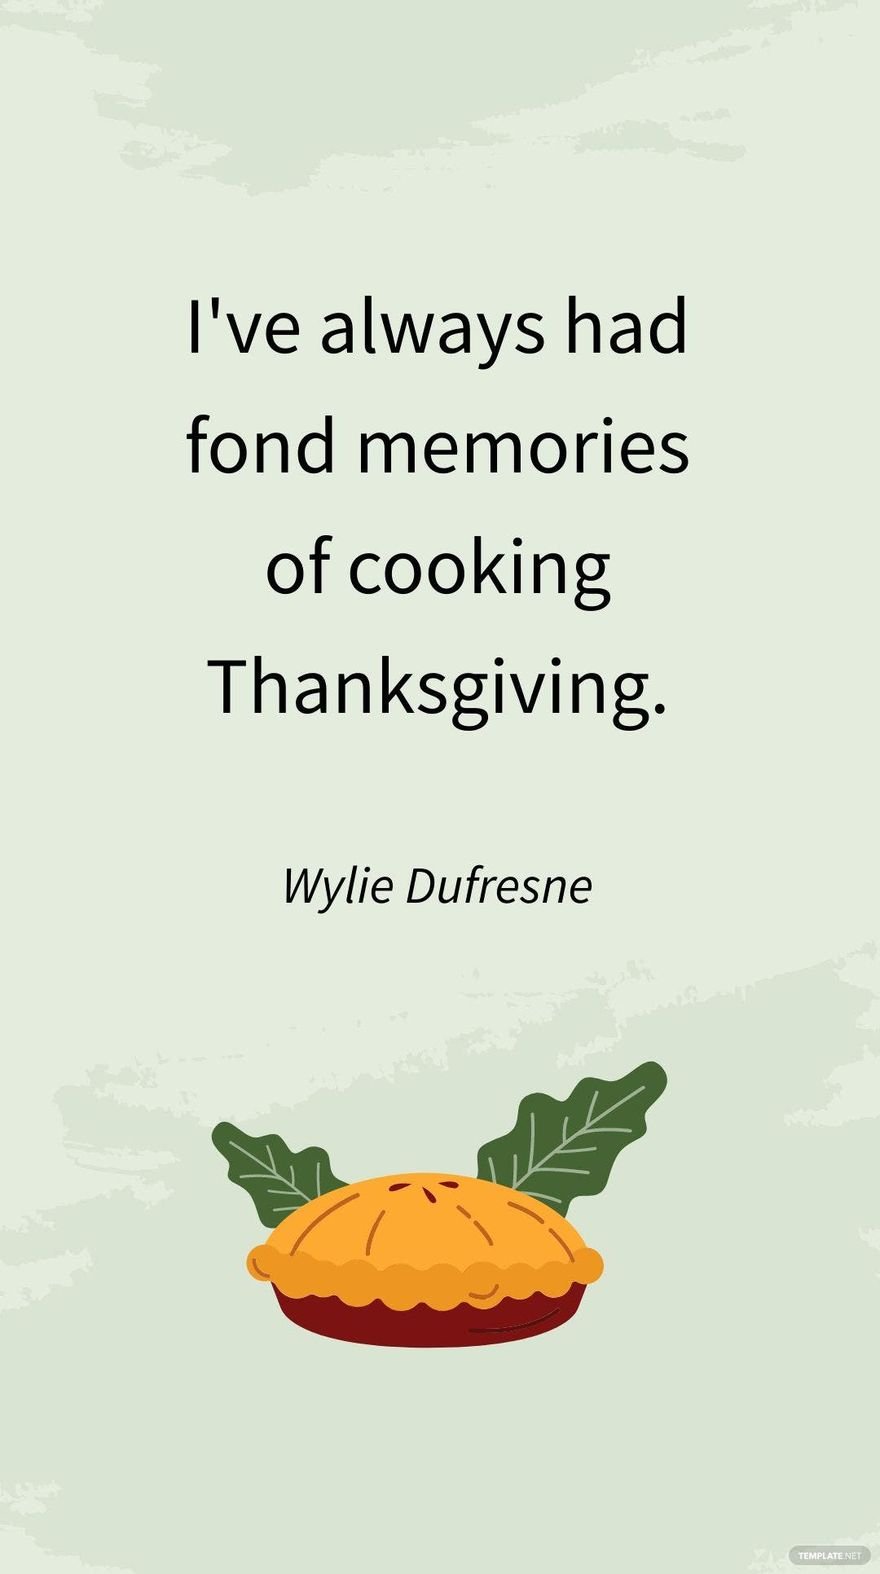 Free Wylie Dufresne - I've always had fond memories of cooking Thanksgiving.